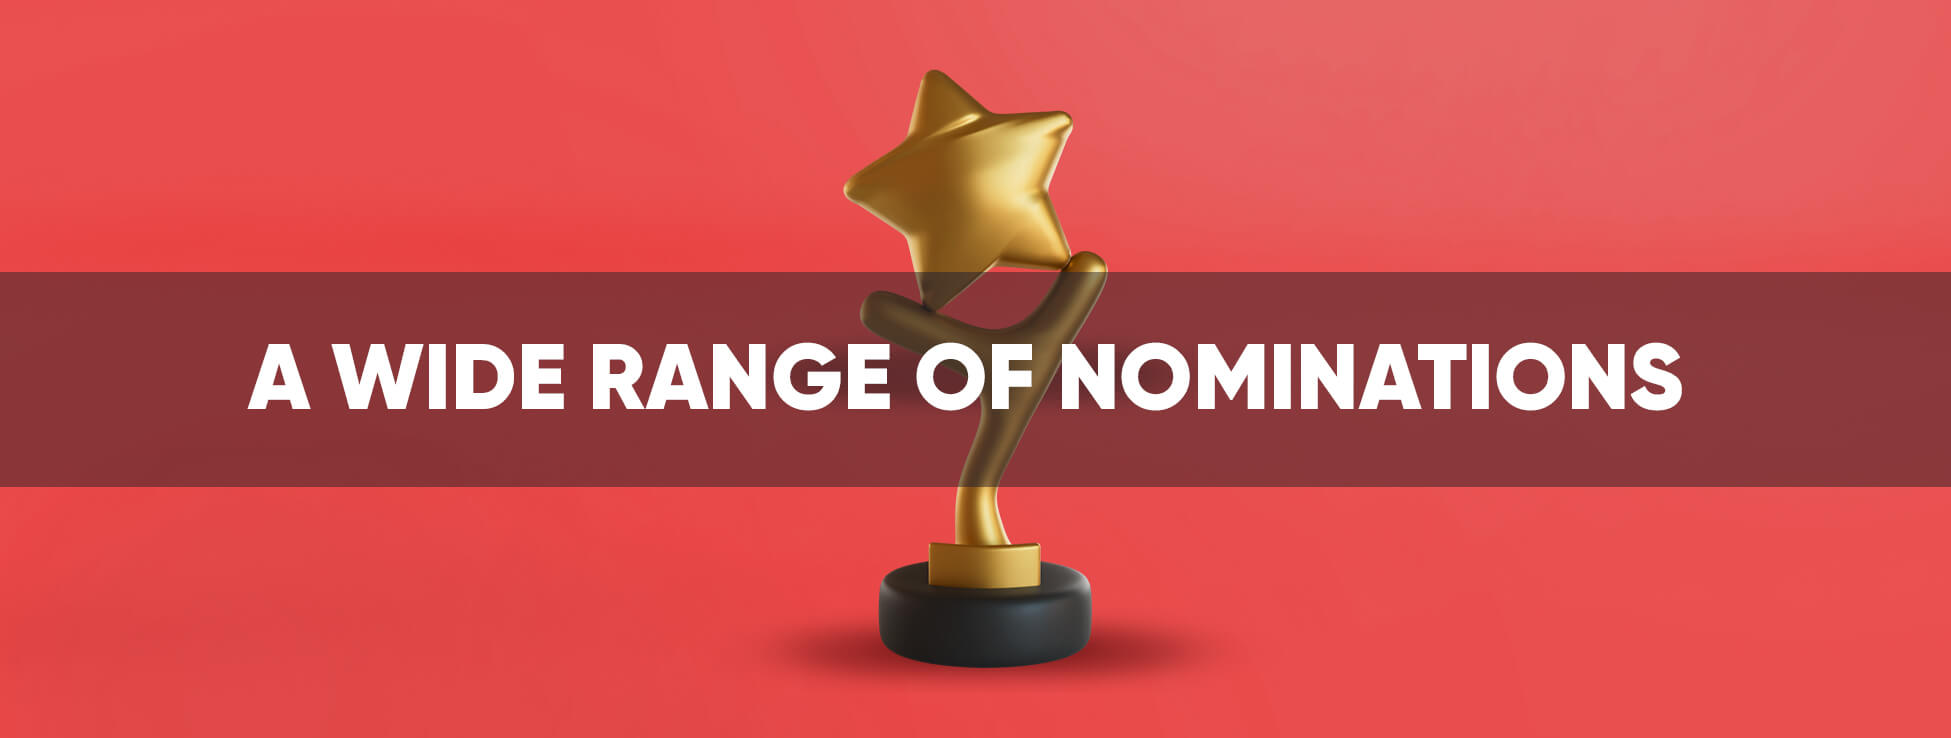 A wide range of nominations